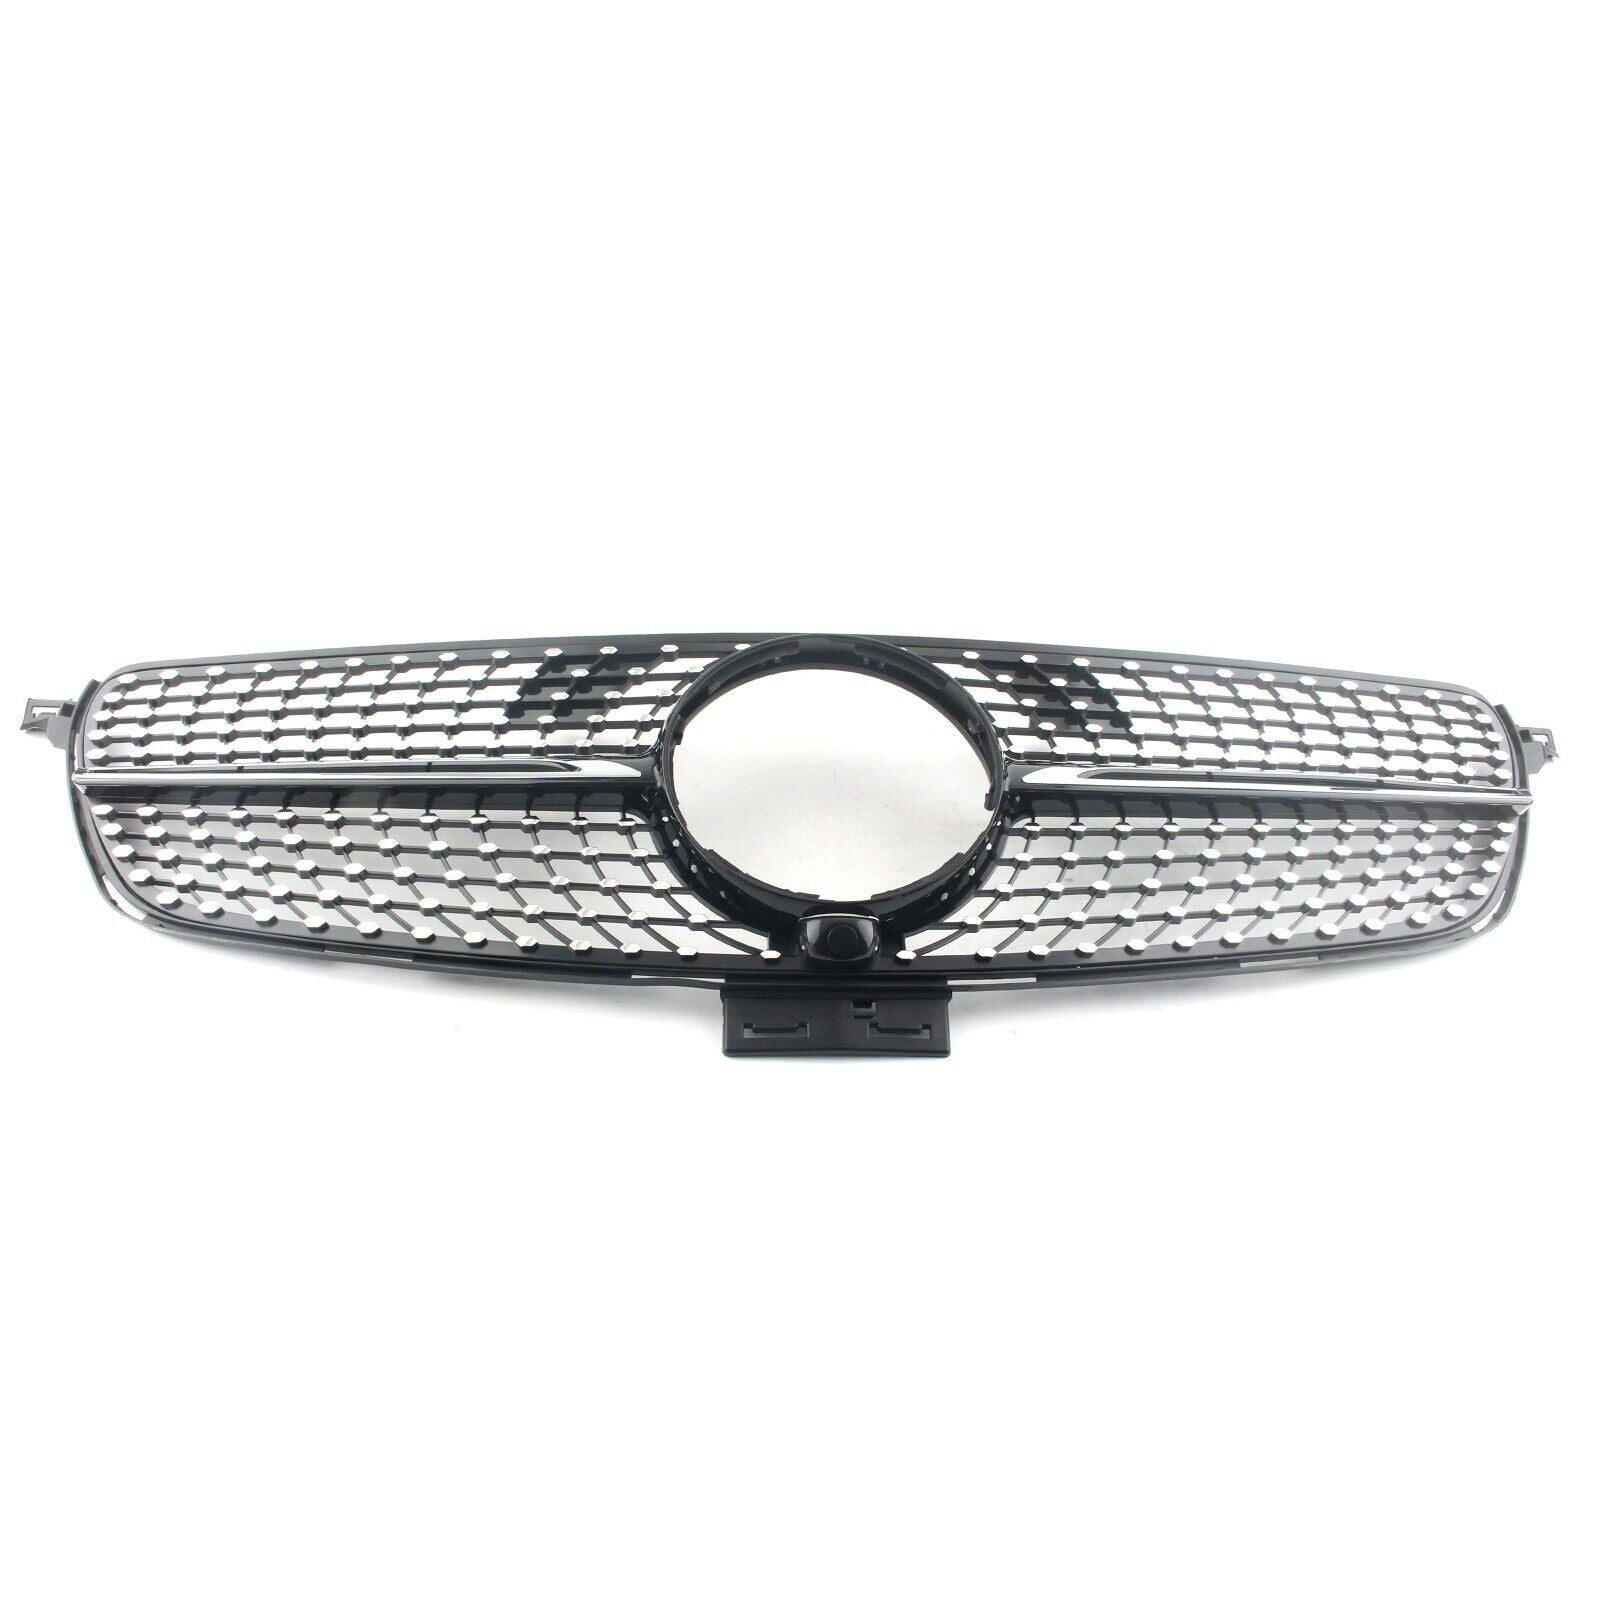 2016-2019 Mercedes-Benz GLE Diamond Style Front Grille | W166 Facelift